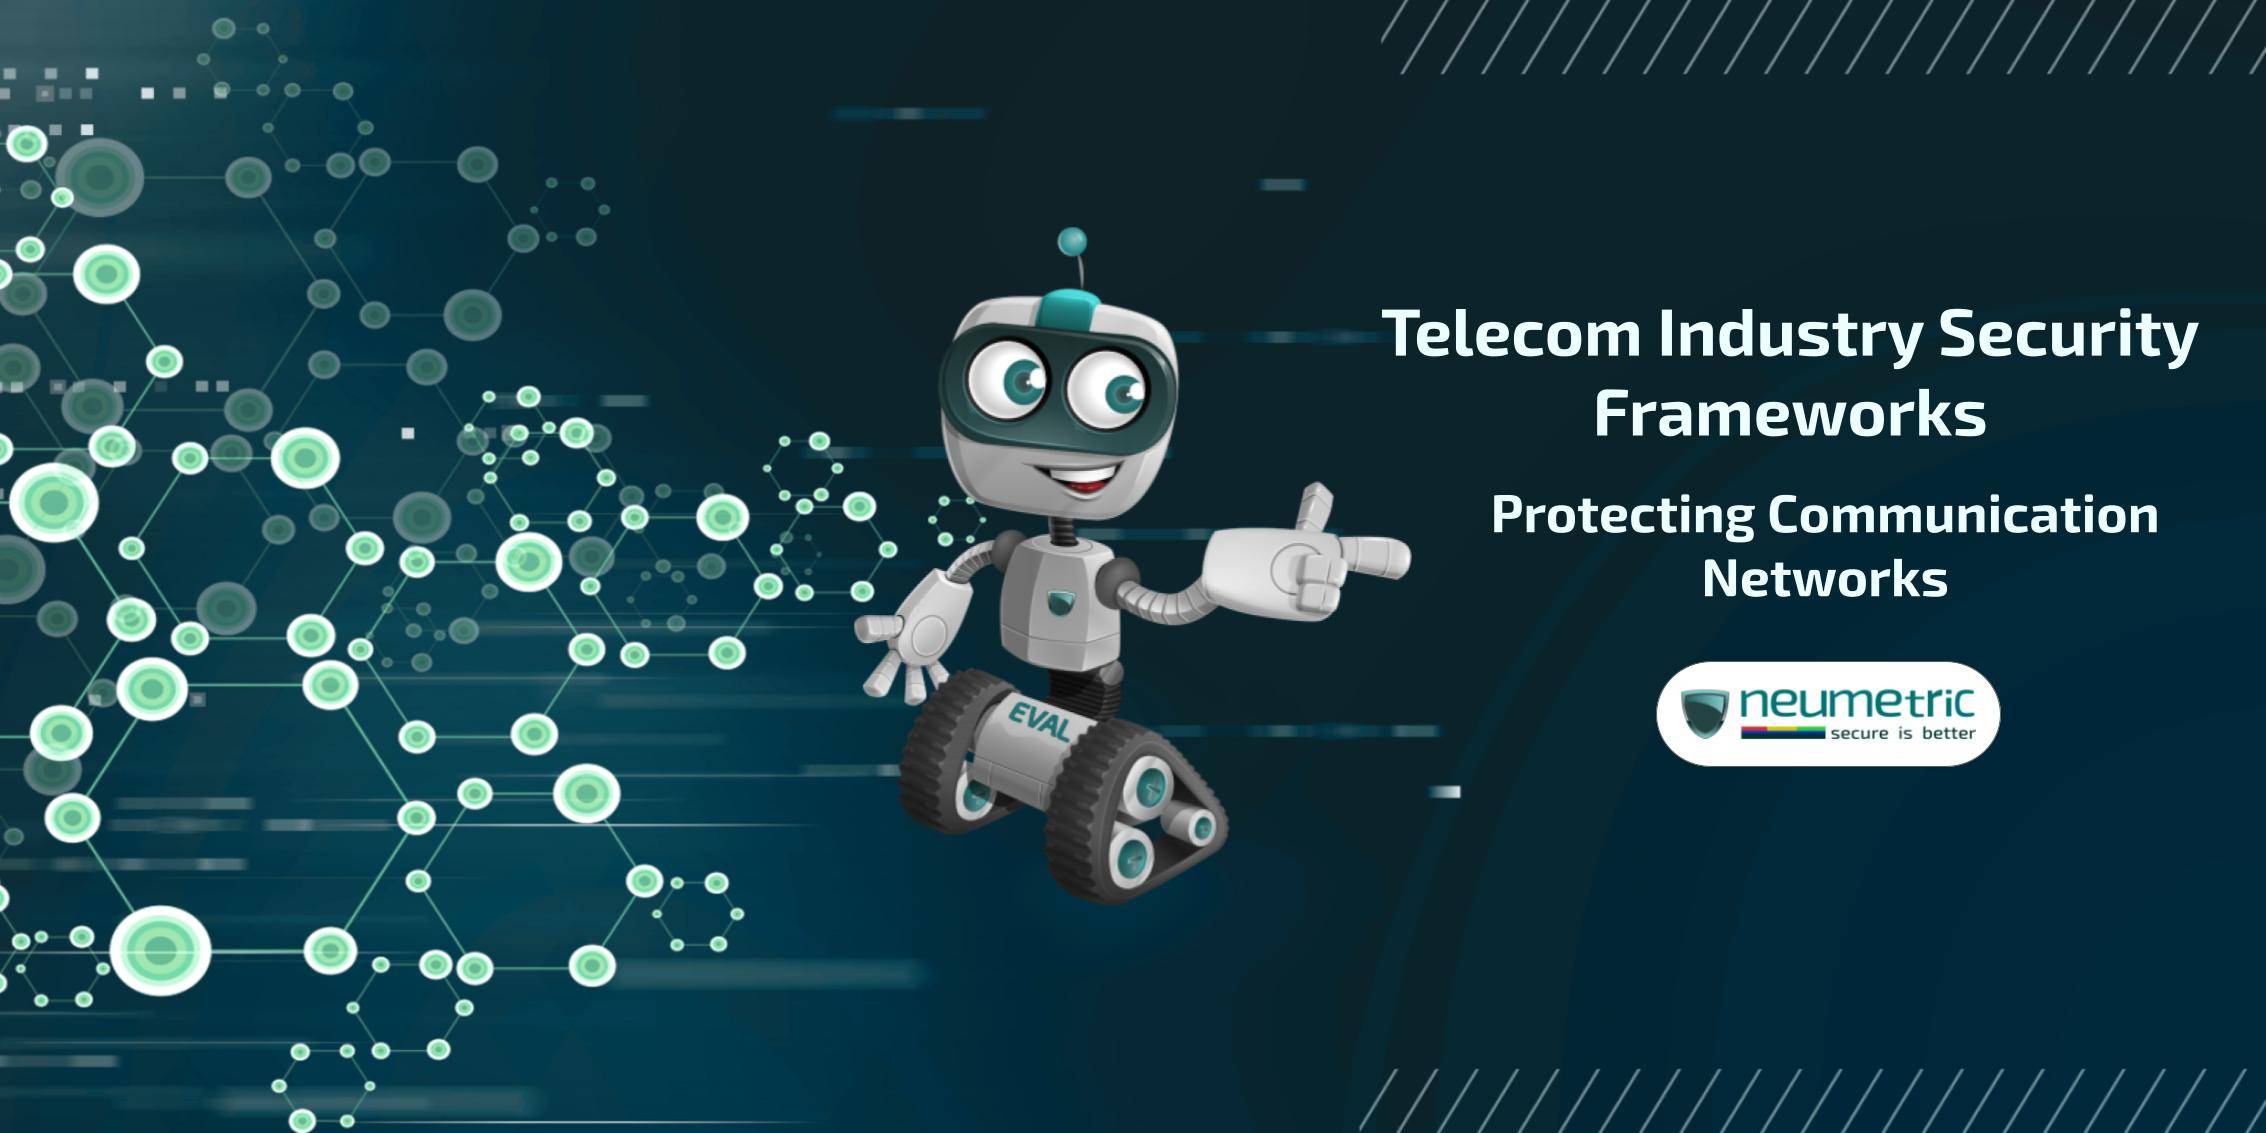 Telecom Industry Security Frameworks: Protecting Communication Networks